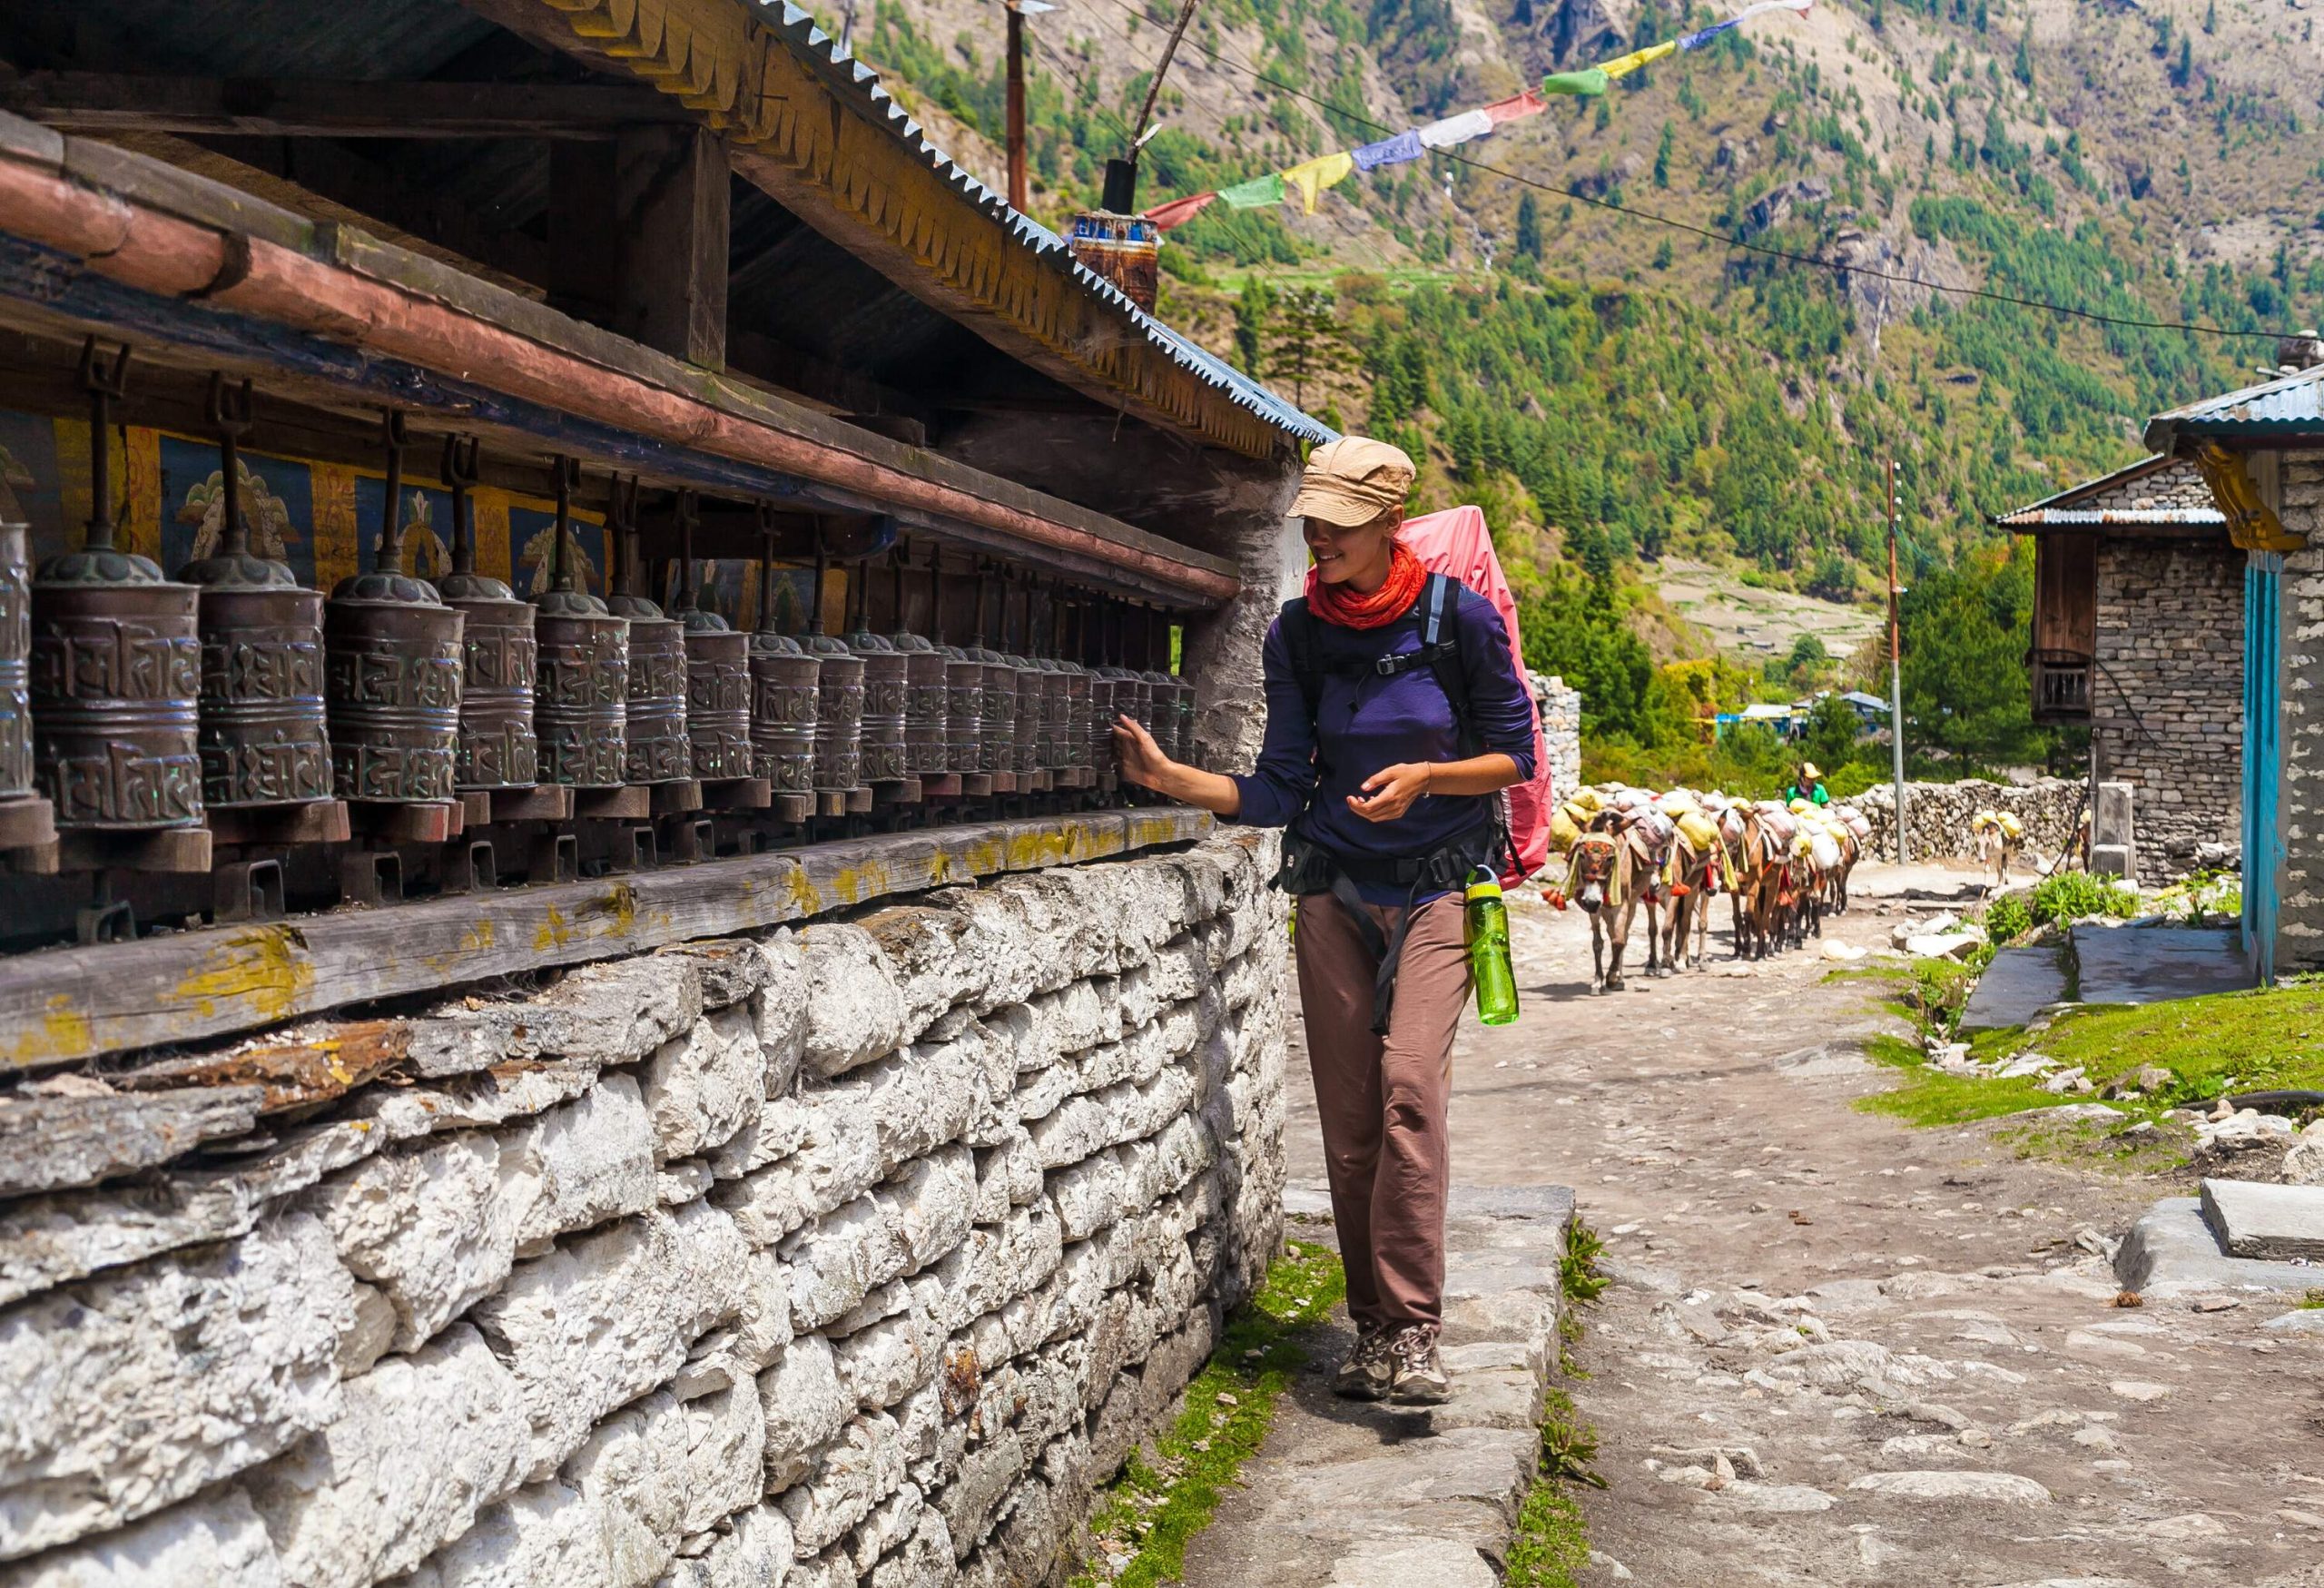 A female hiker with a camping bag touched a row of prayer wheels on a sidewalk.